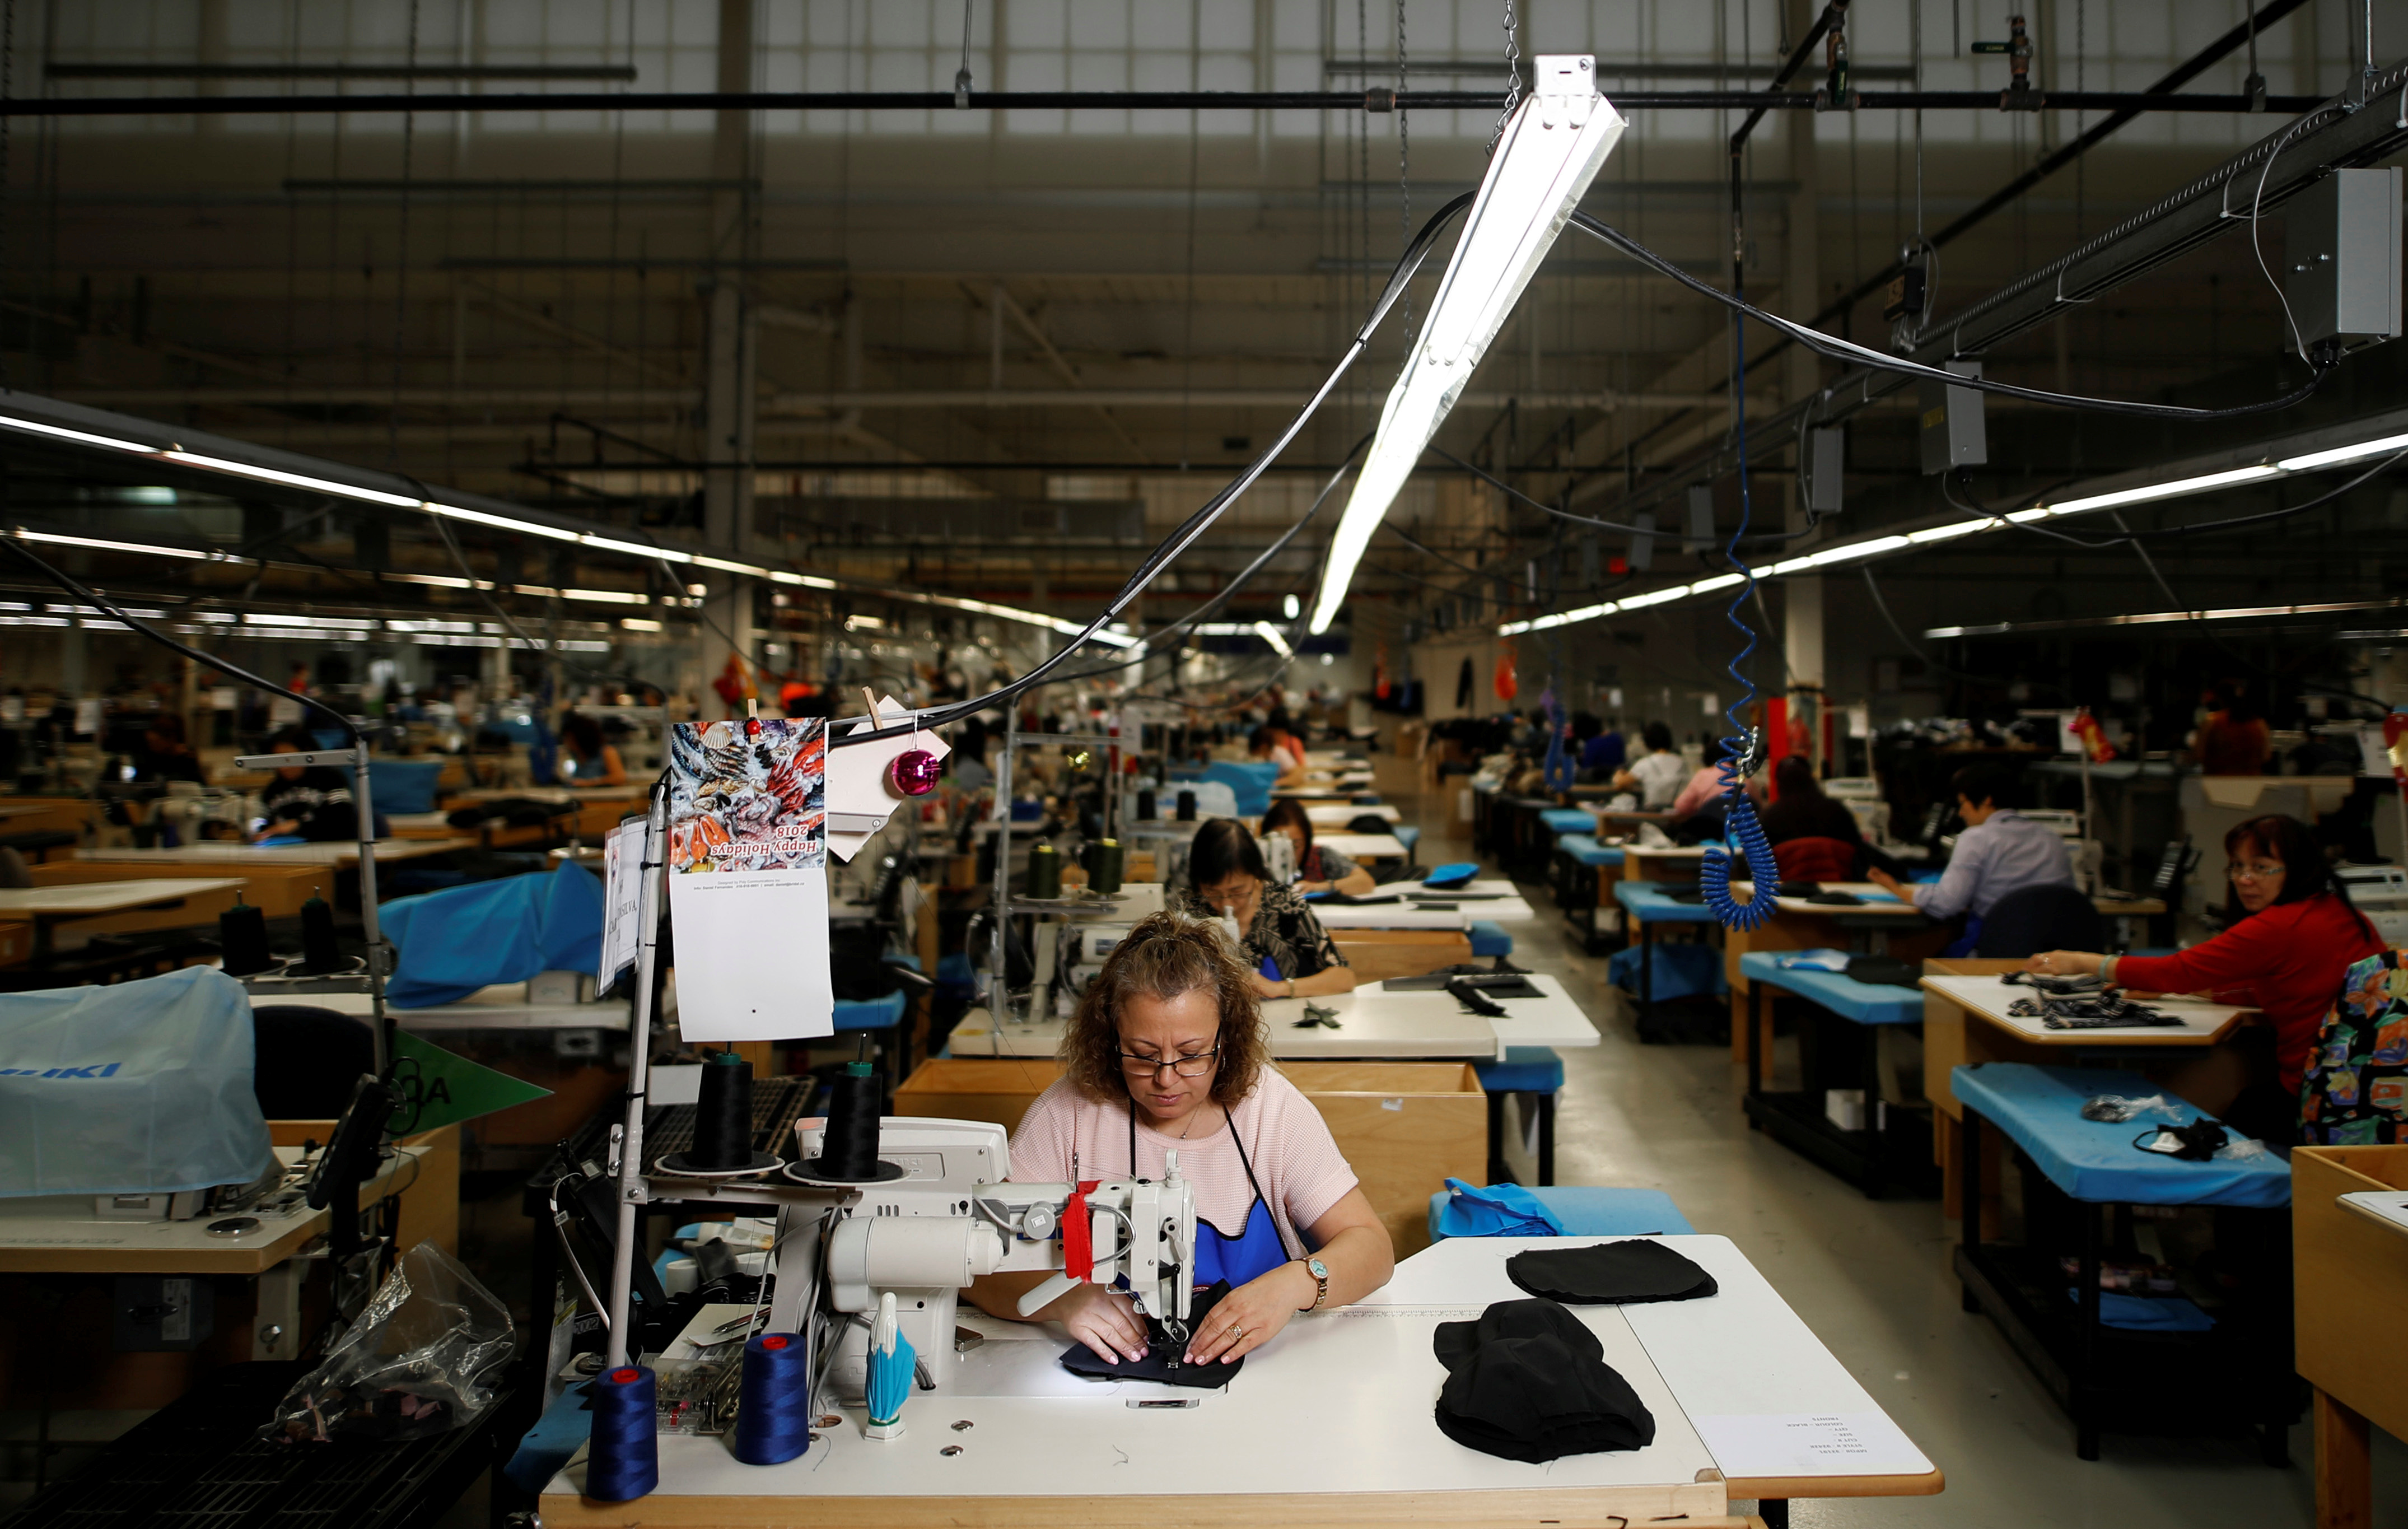 Workers make jackets at the Canada Goose factory in Toronto